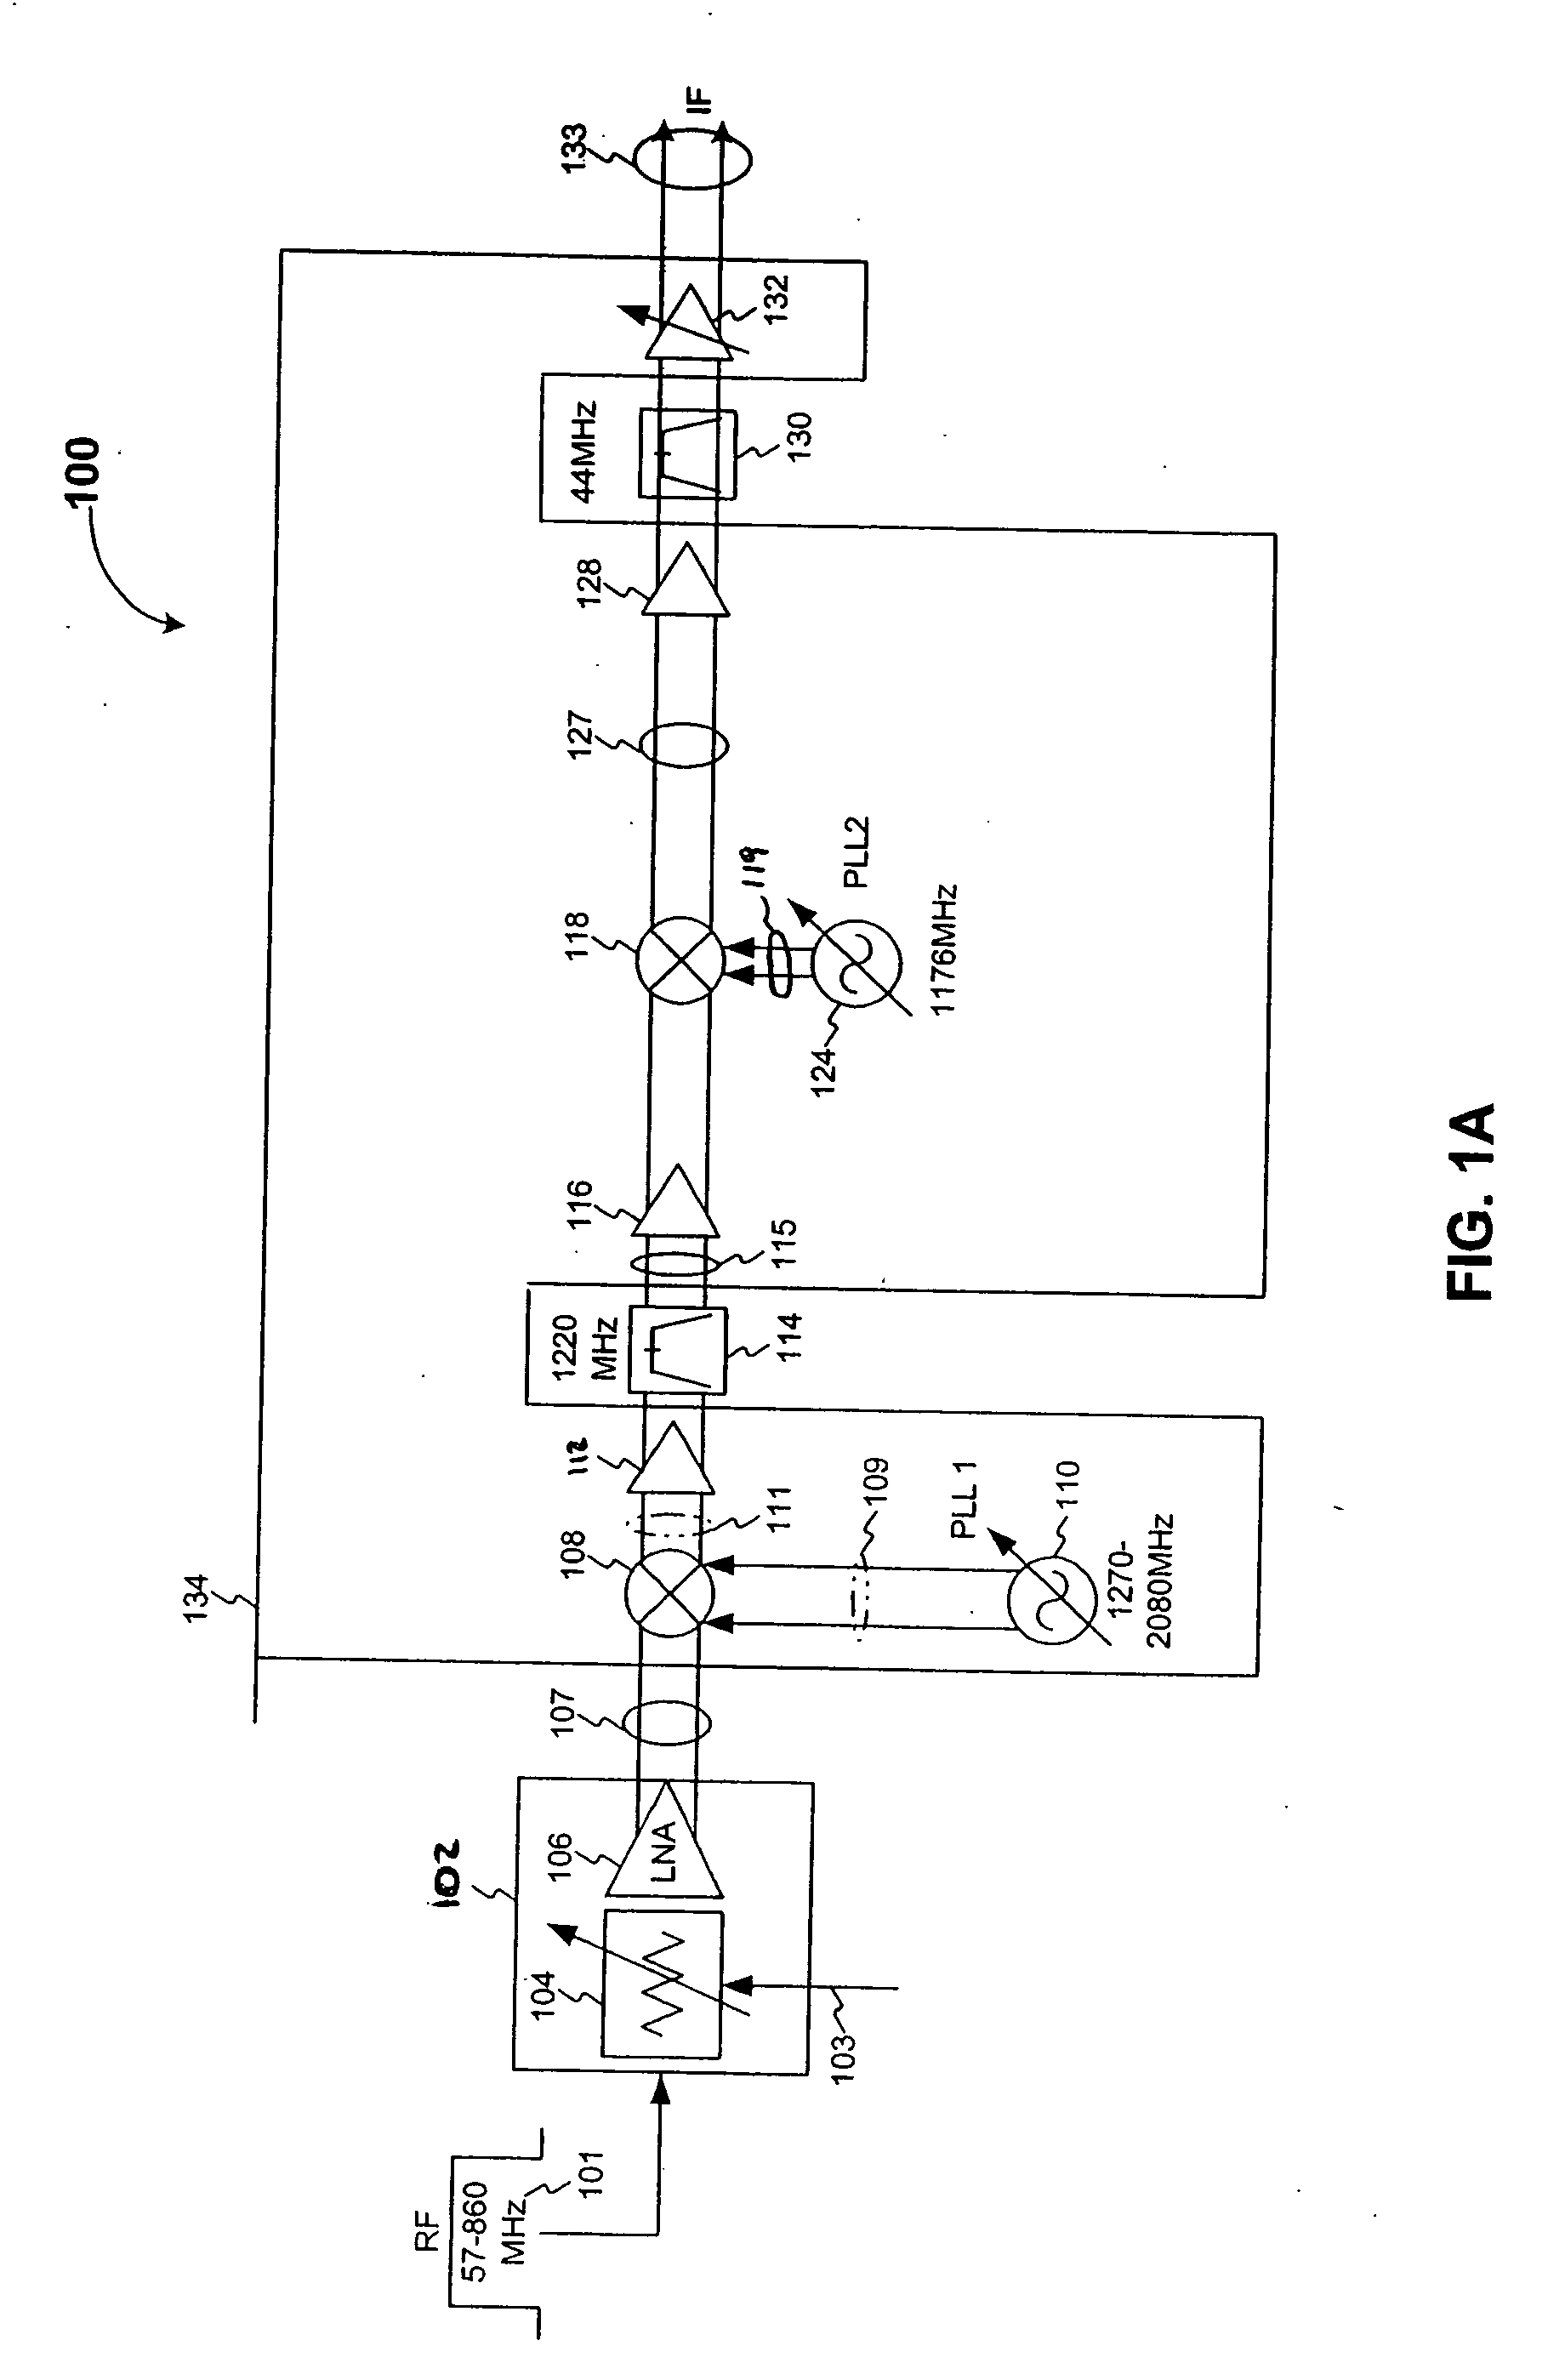 Dual conversion receiver with reduced harmonic interference